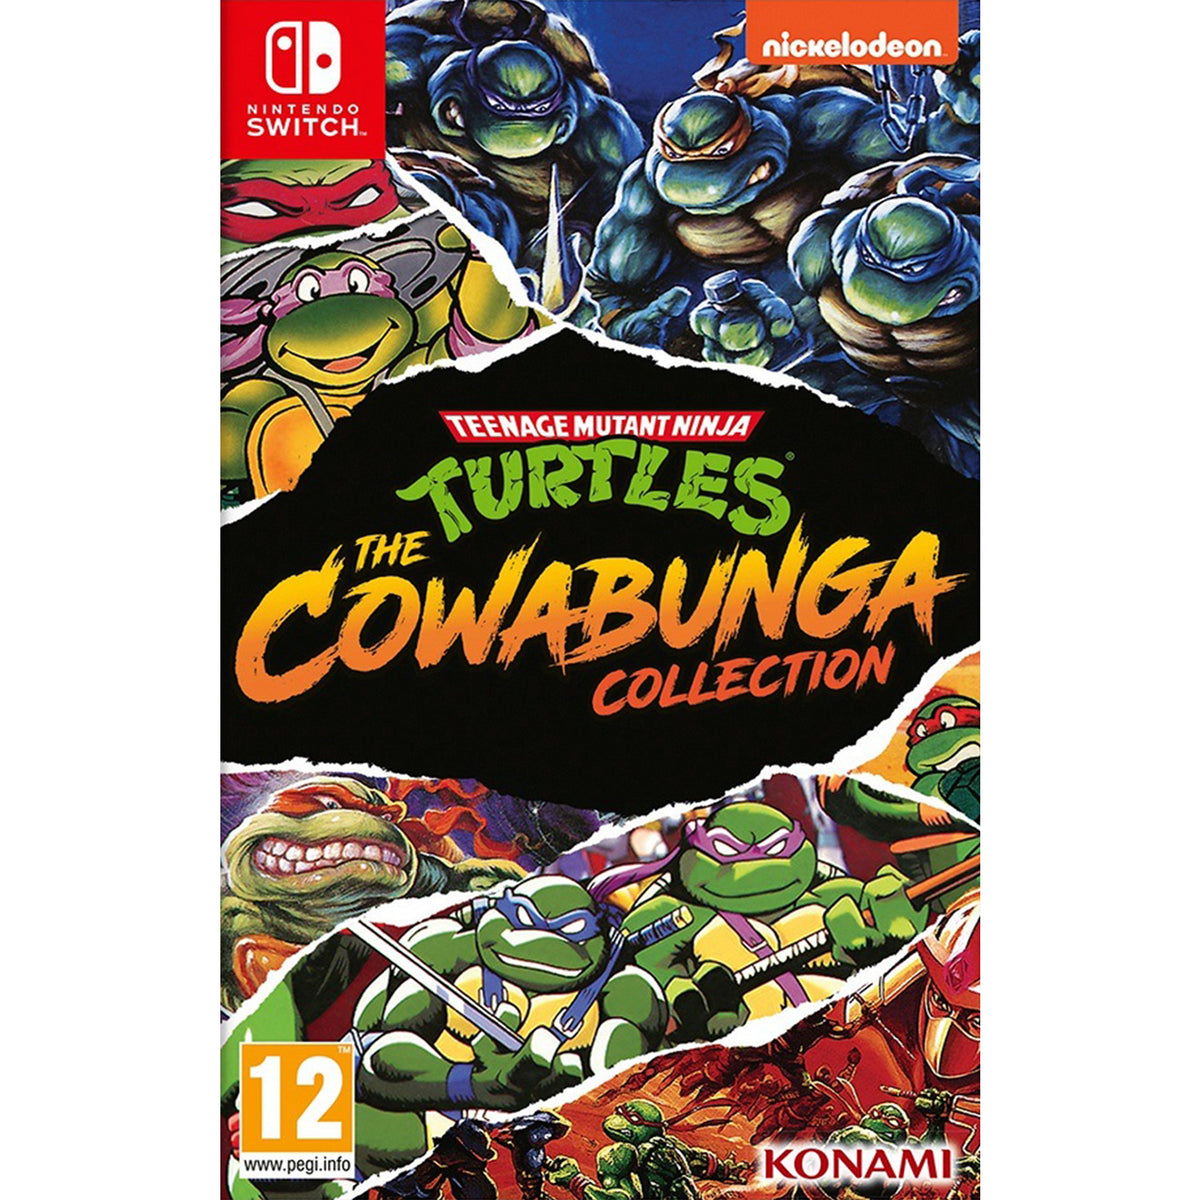 Deal The Cowabunga Day! Of The Teenage Entertainment Switch Go\'s – Turtles: Collection Mutant Ninja -